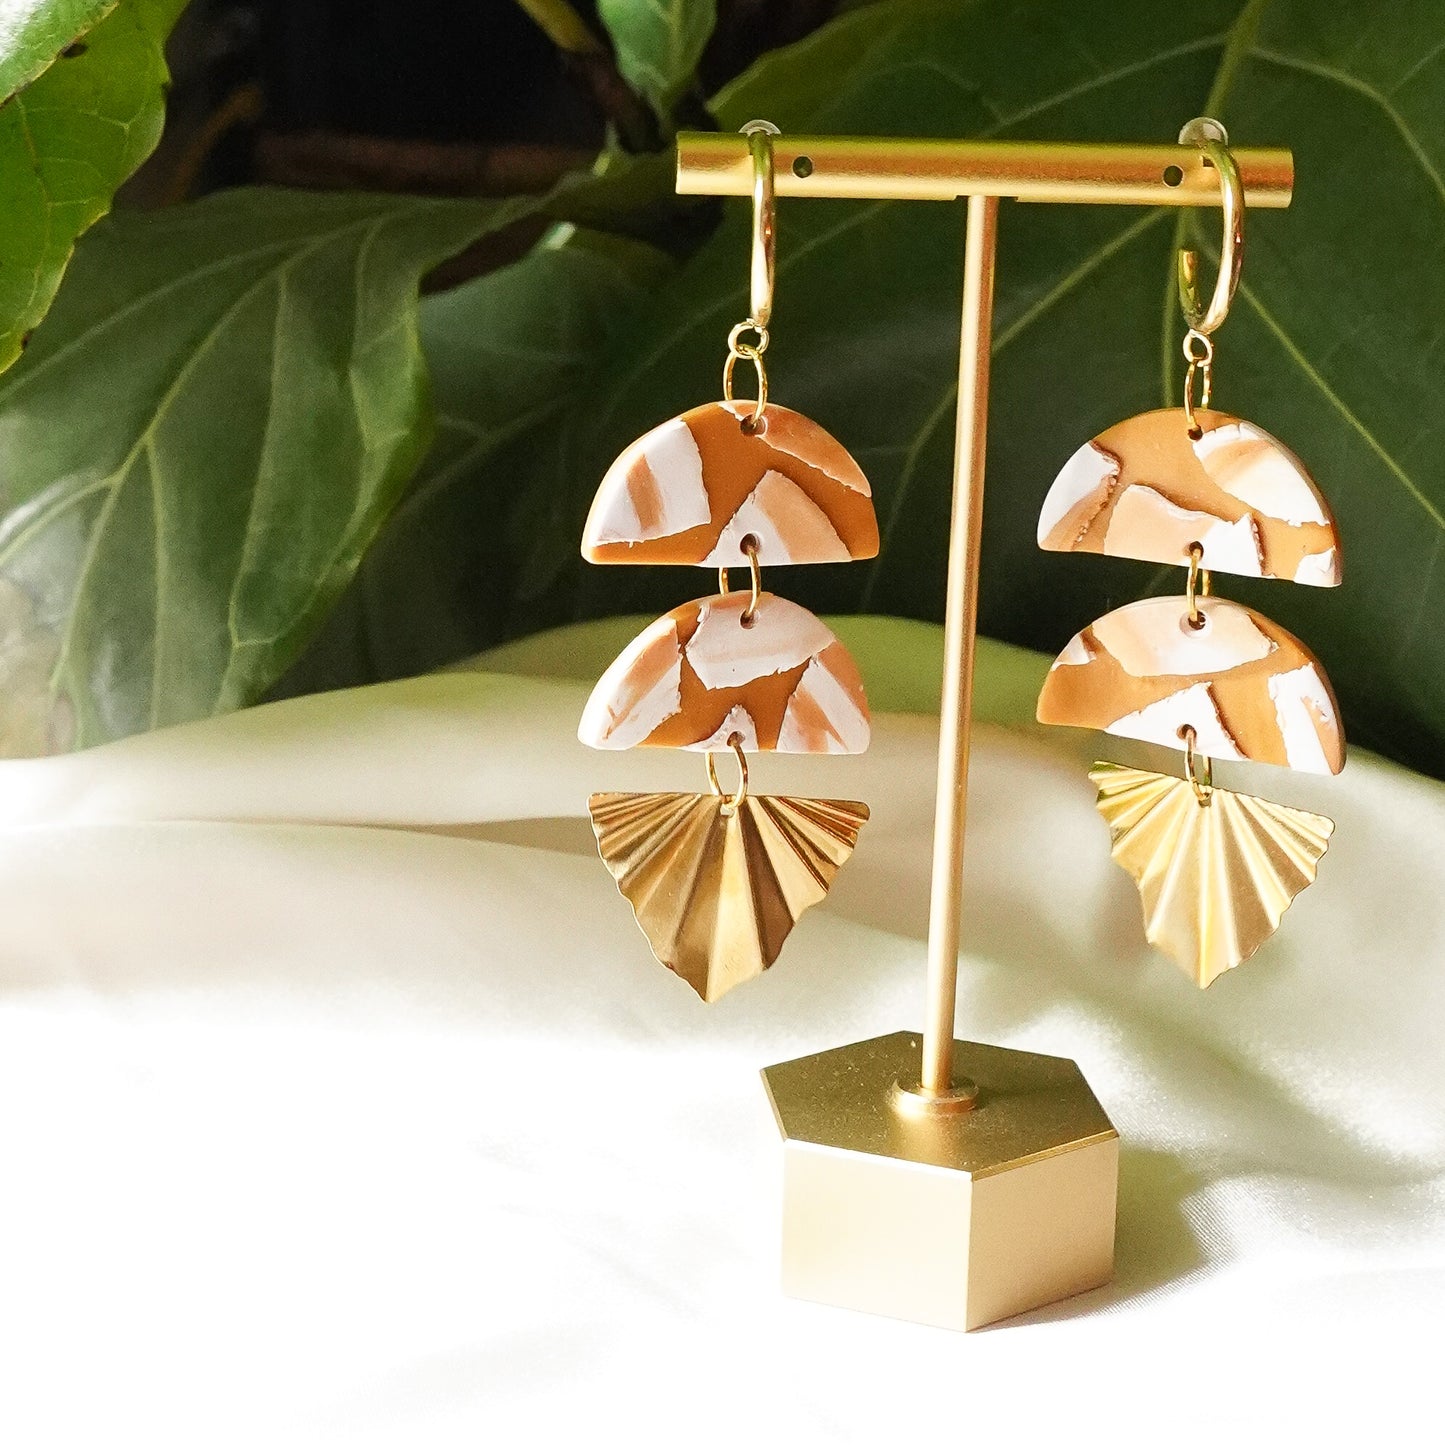 "Pot of Gold" Statement Earrings